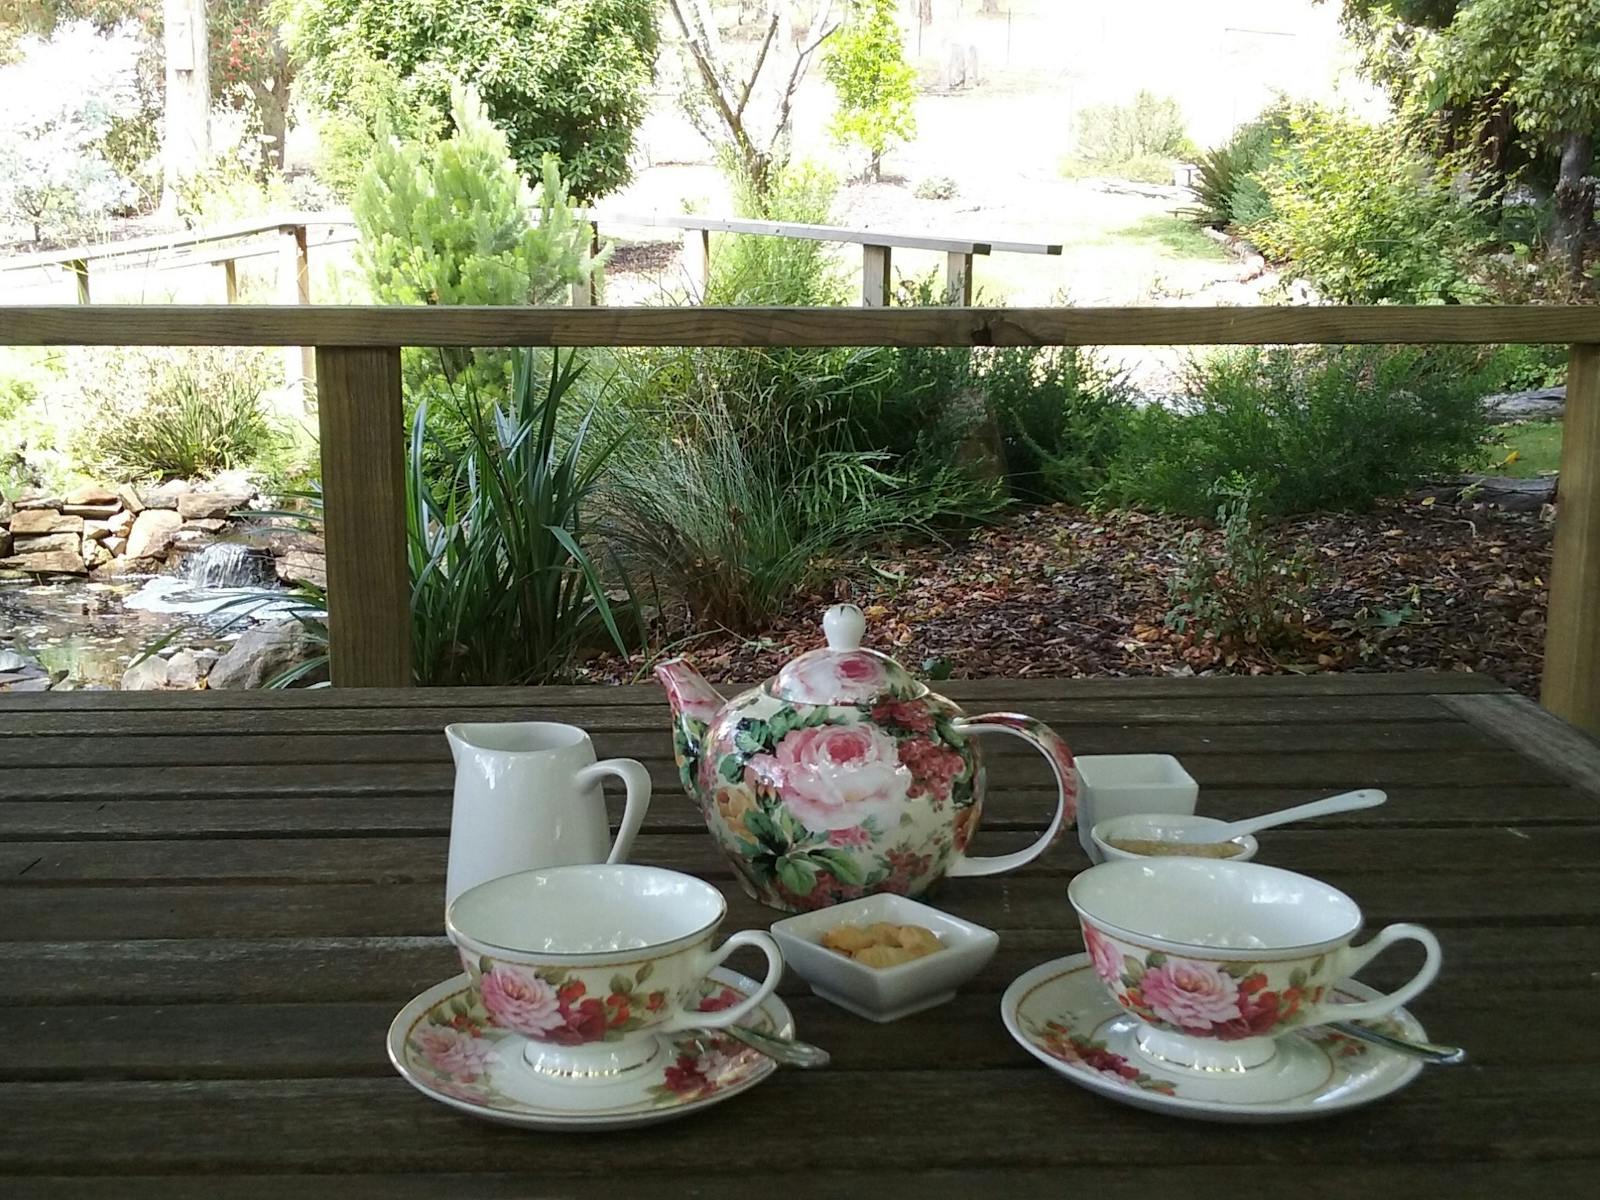 Floral teapot and cups ready to be served on the deck in front of our small ornamental pond